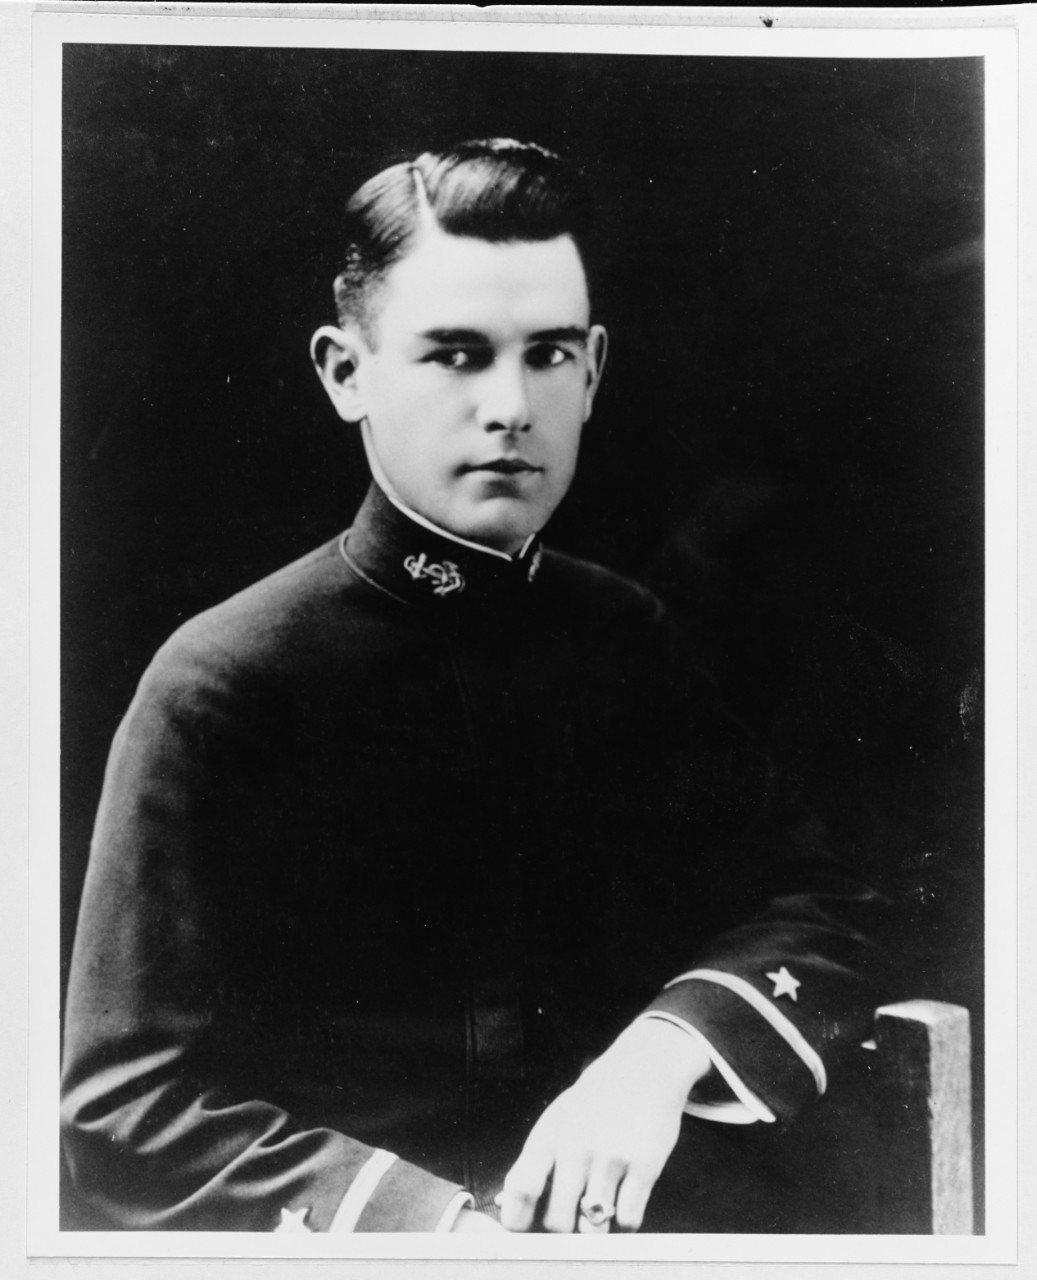 Ensign Claude F. Reynaud, USN Reserve Force